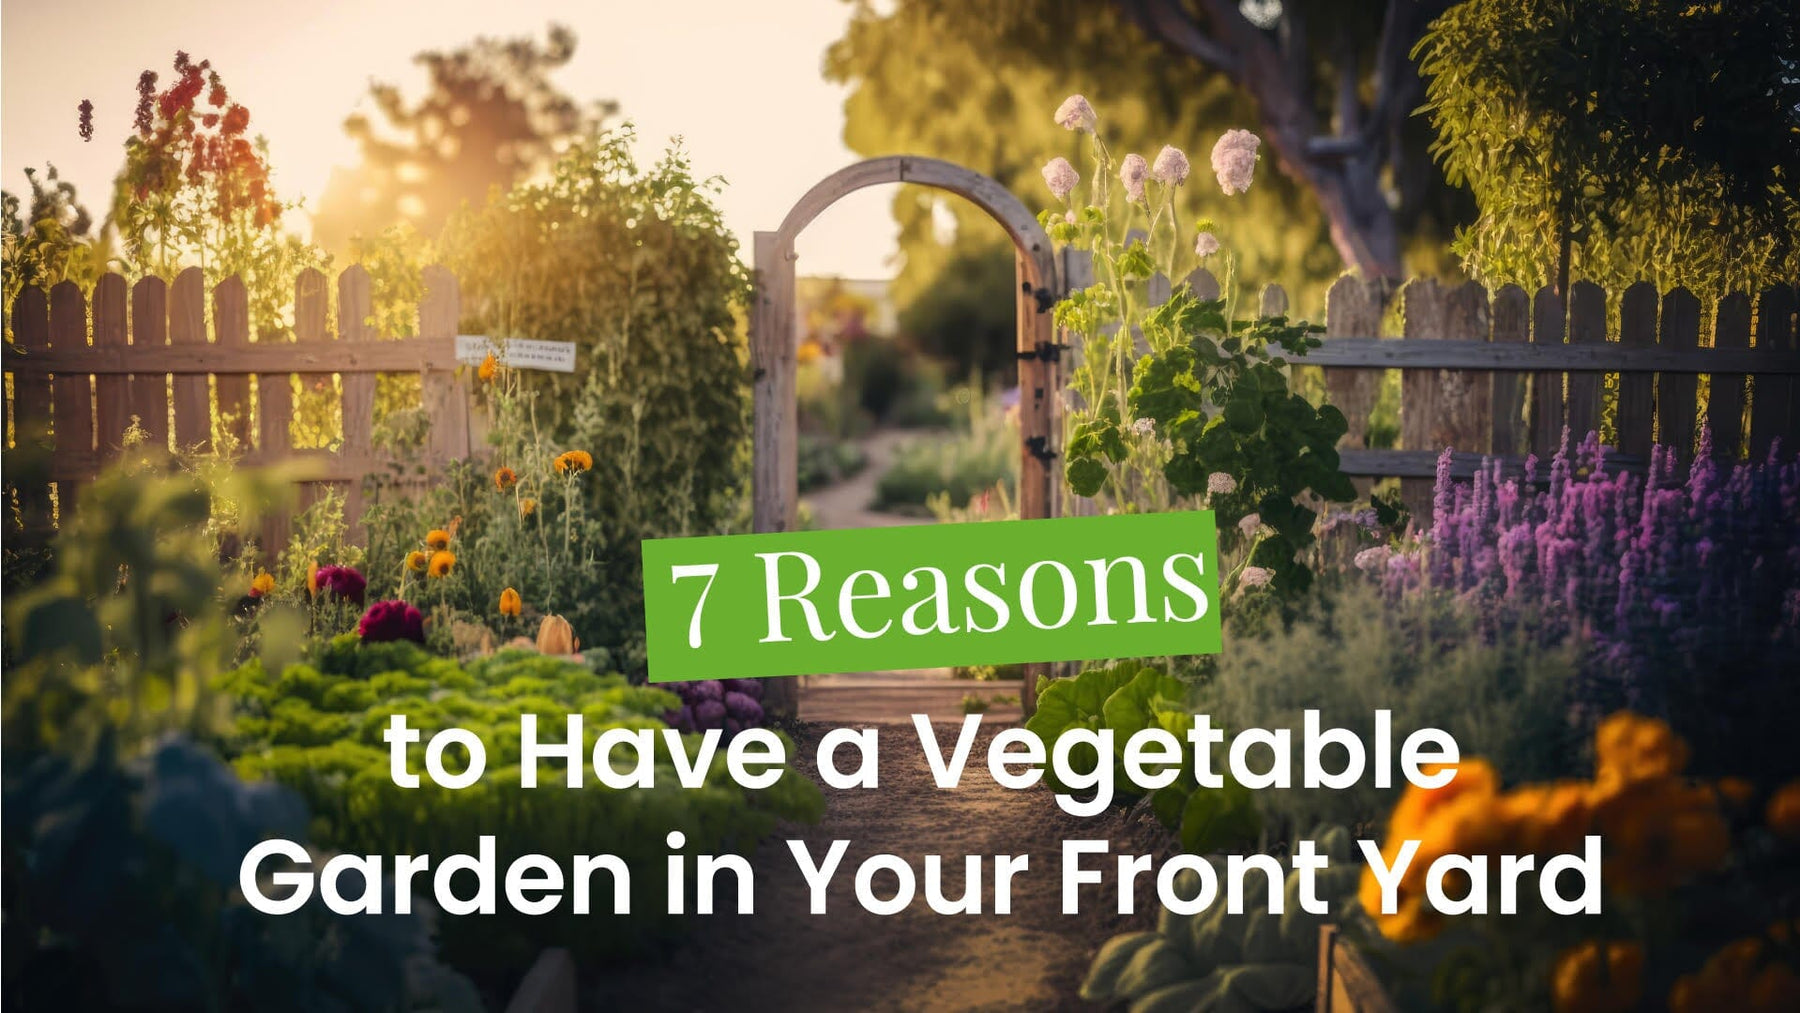 7 Reasons to Have a Vegetable Garden in your Front Yard